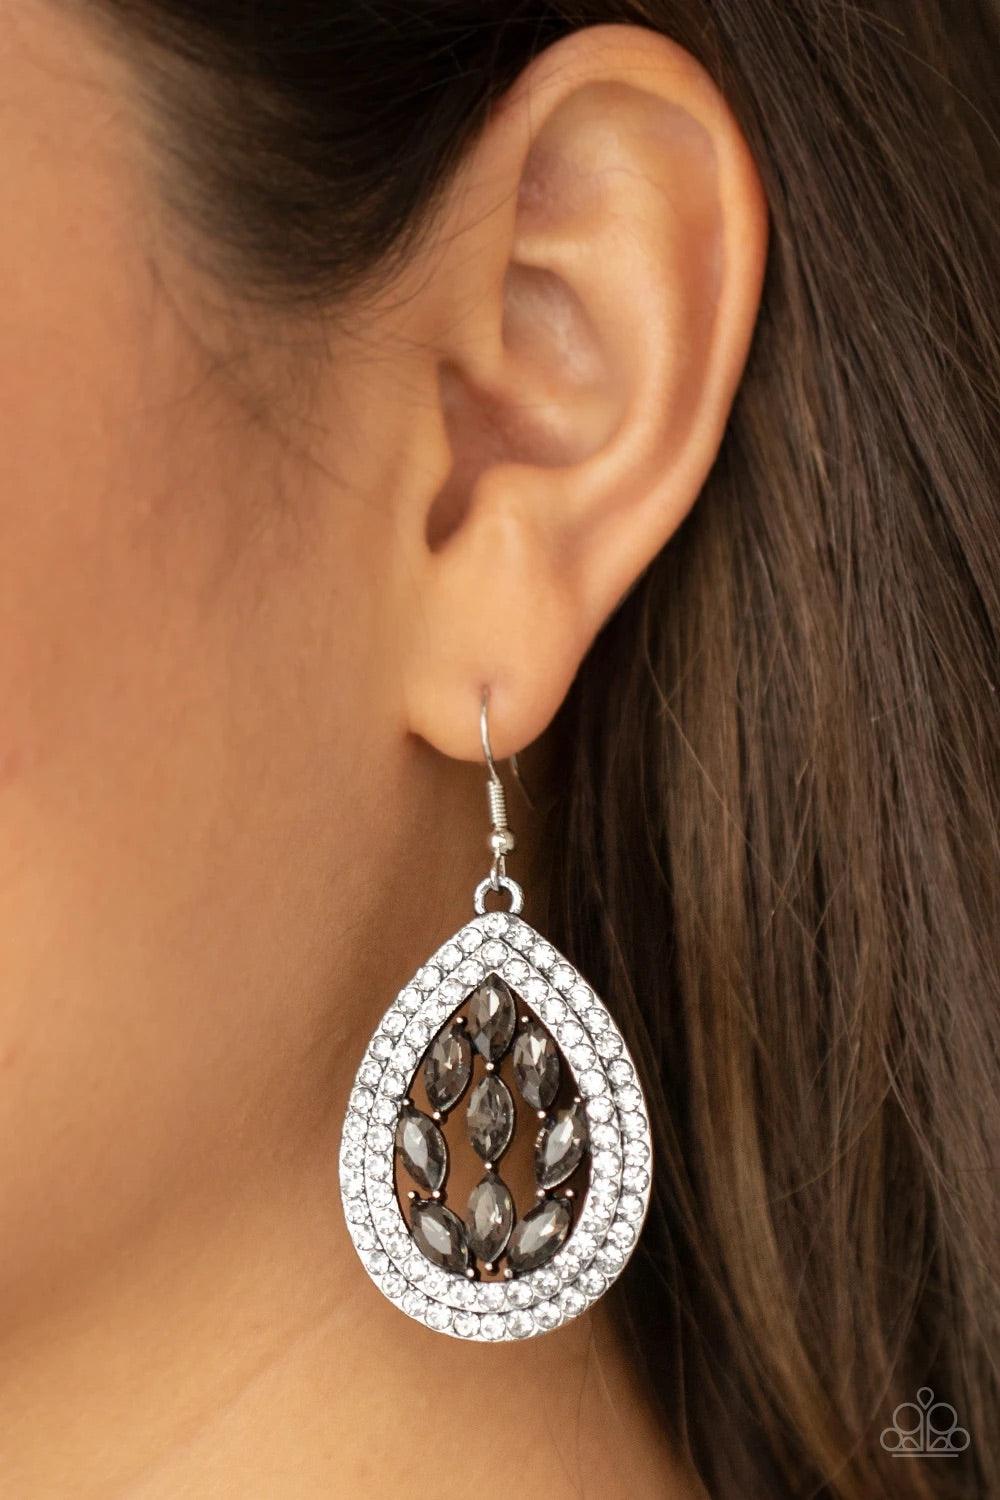 Paparazzi Accessories Encased Elegance - Silver Smoky marquise cut rhinestones collect inside two borders of glassy white rhinestones, coalescing into a sparkly teardrop. Earring attaches to a standard fishhook fitting. Sold as one pair of earrings. Jewel